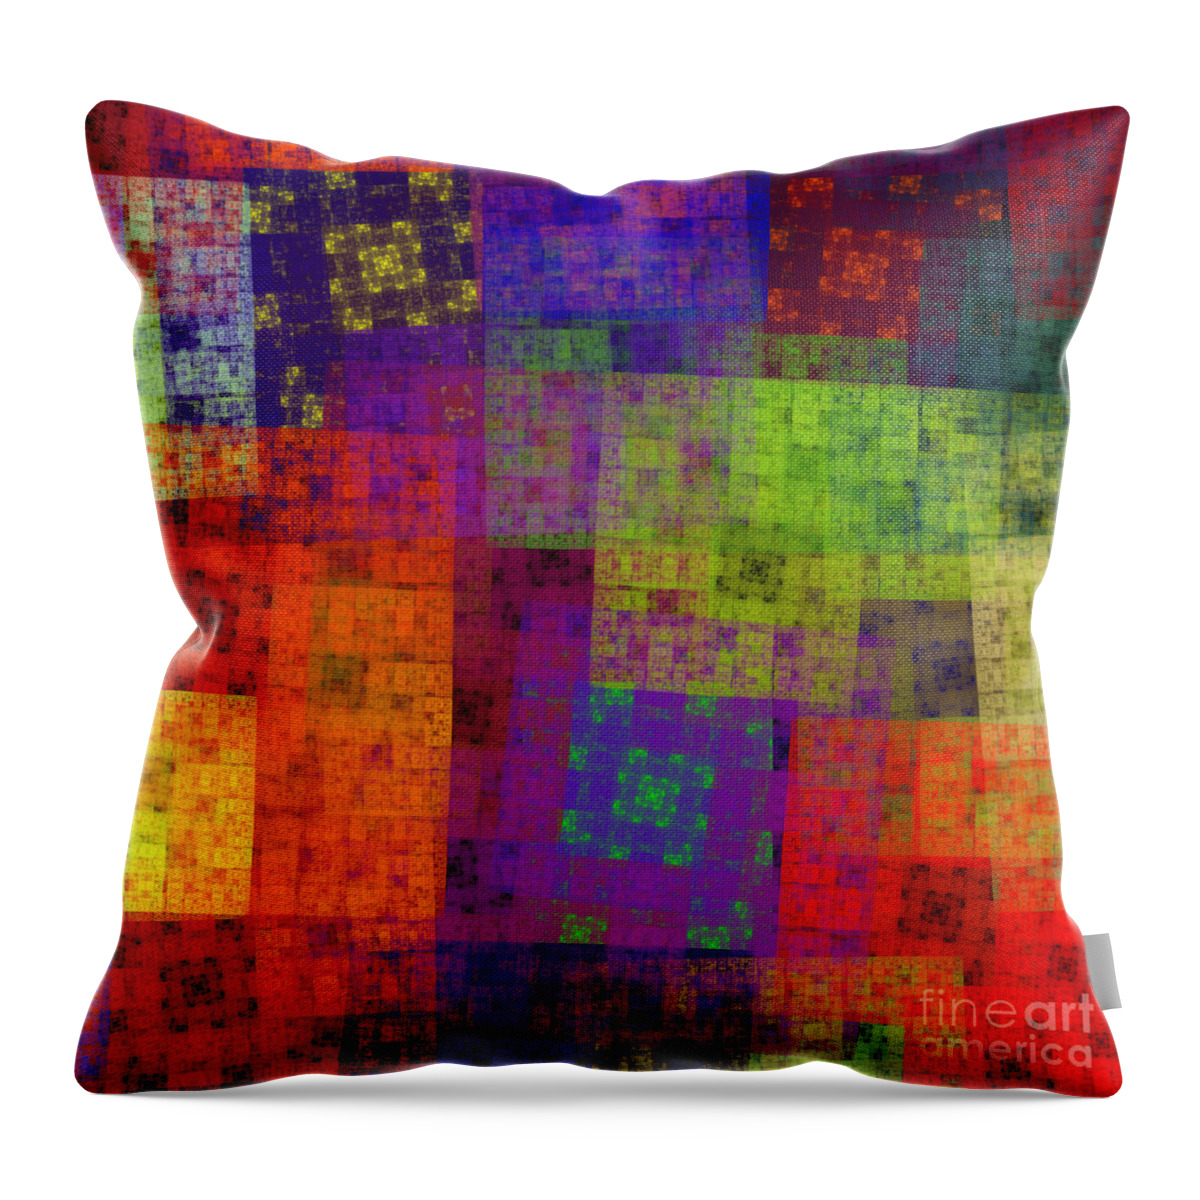 Andee Design Abstract Throw Pillow featuring the digital art Abstract - Rainbow Bliss - Fractal - Square by Andee Design